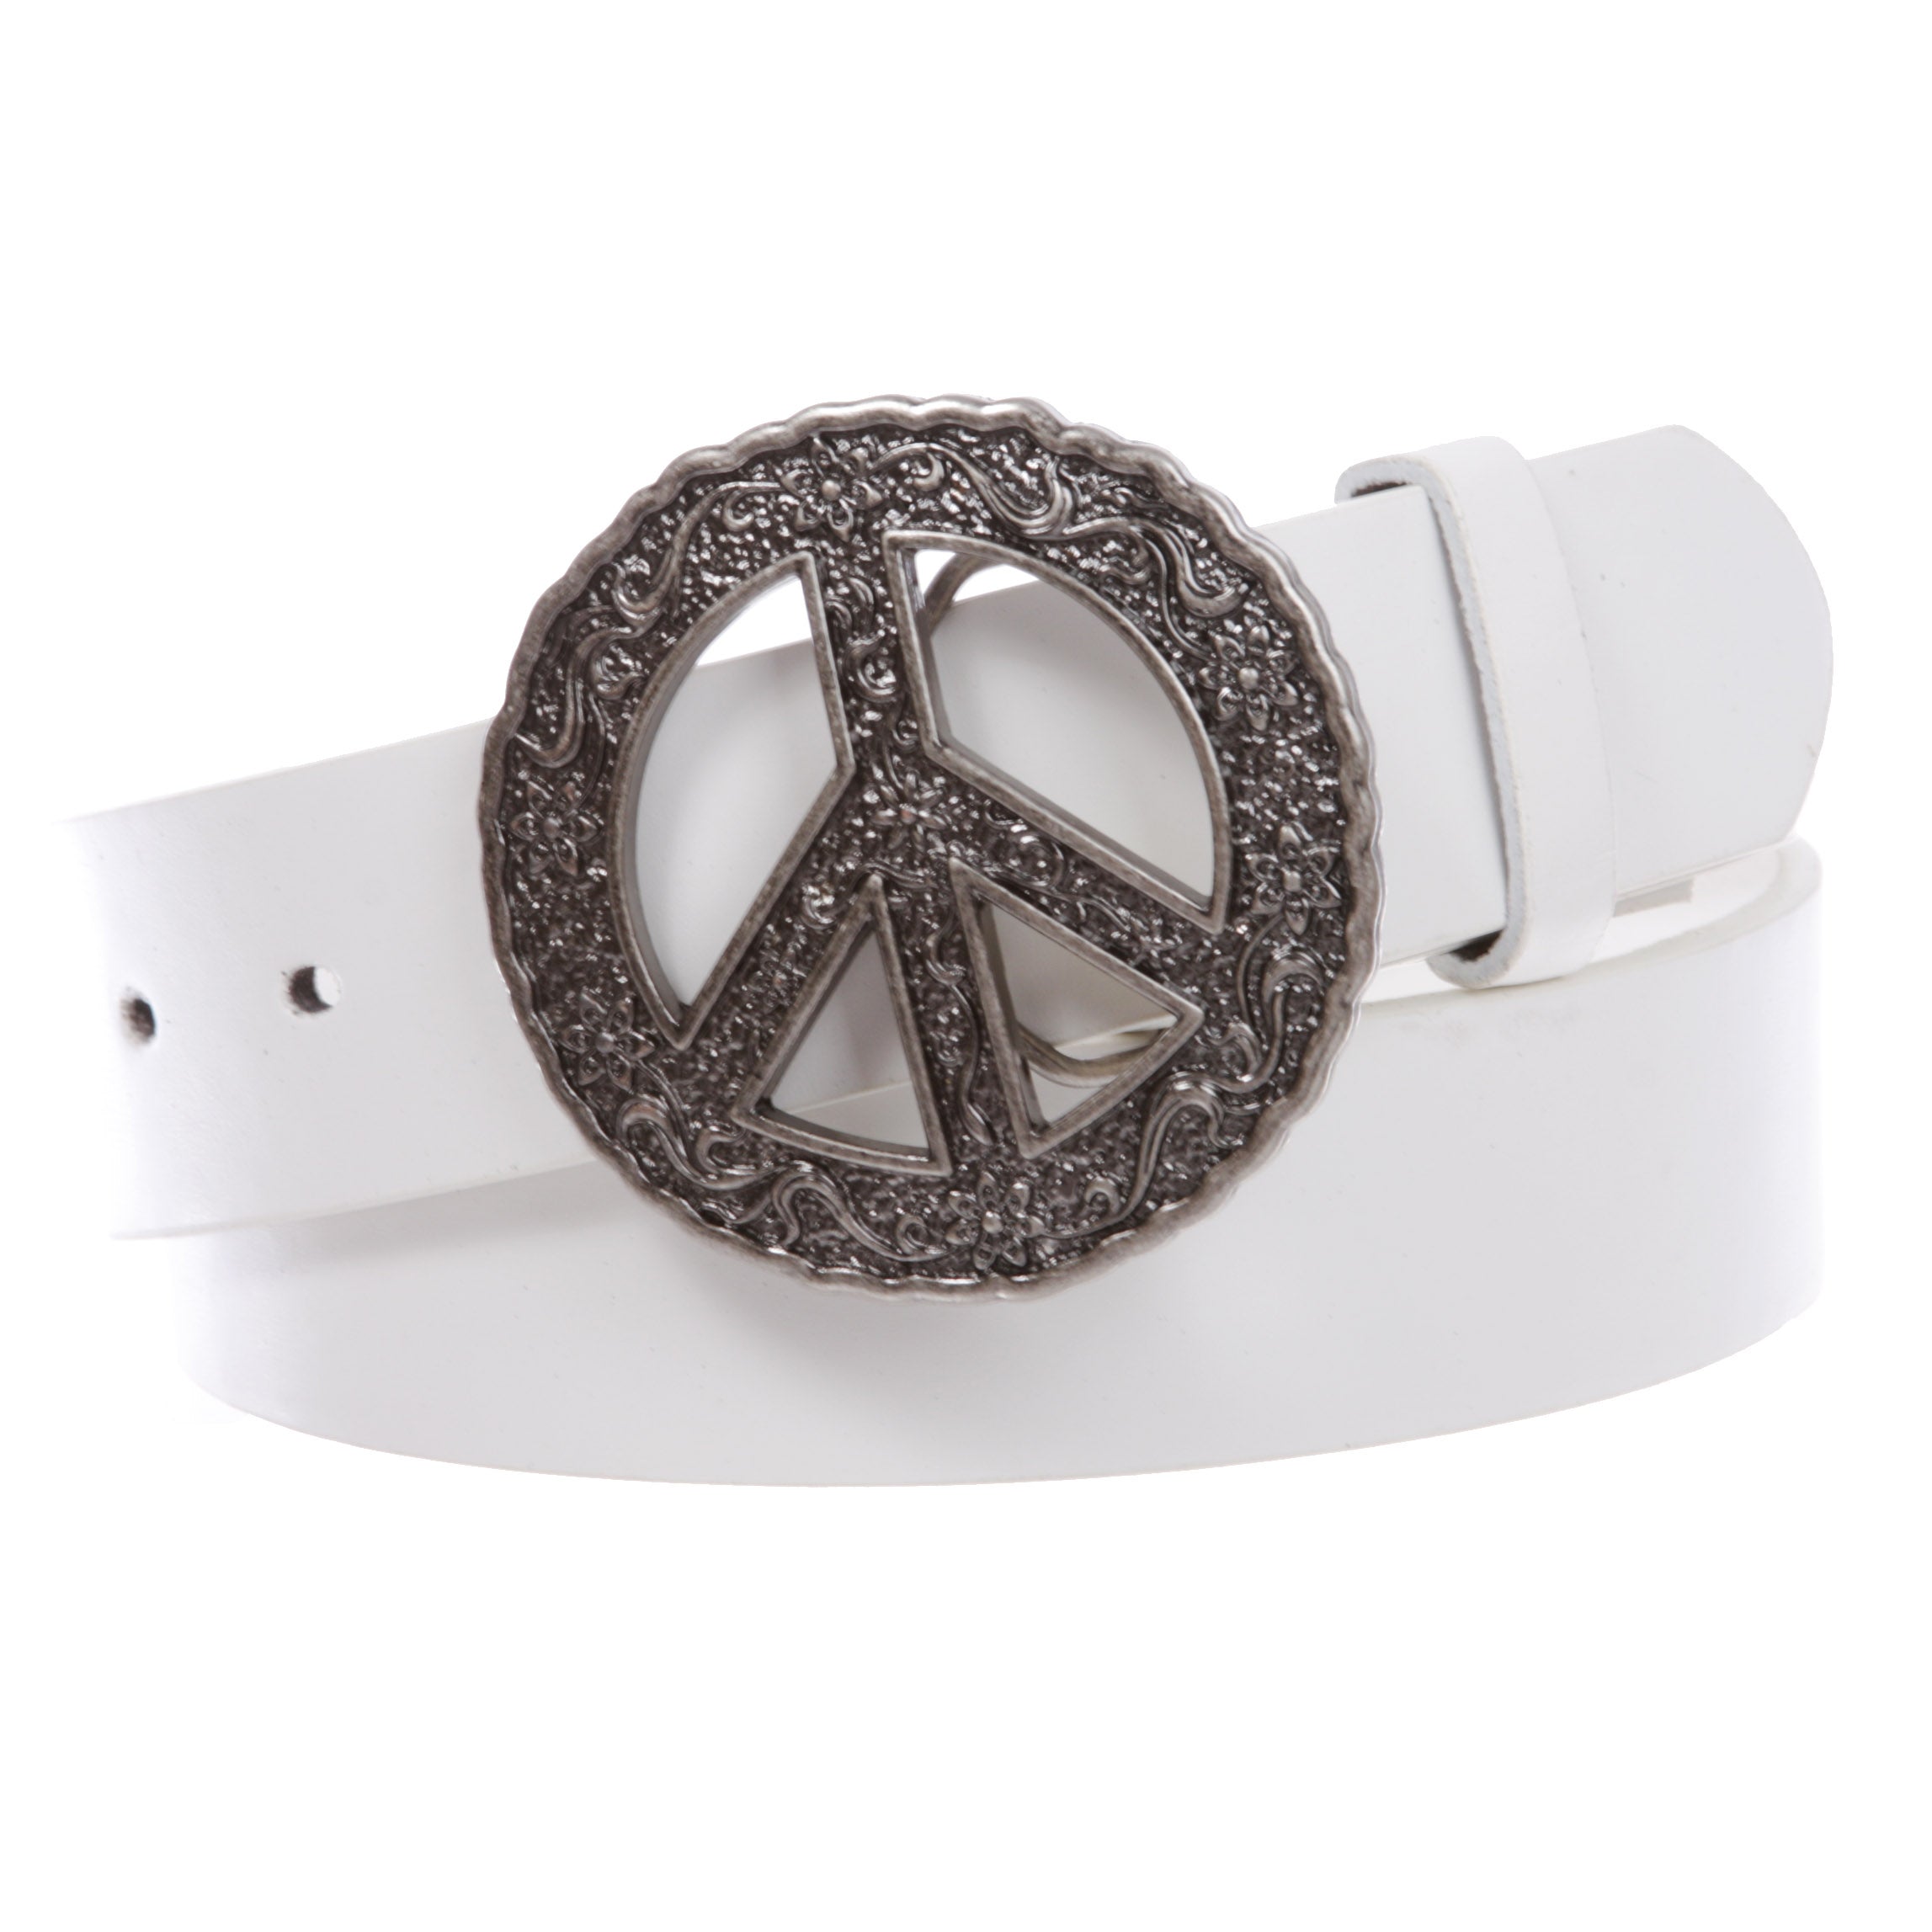 1 1/2" Snap On Belt With Round Perforated Floral Engraving Peace Sign Belt Buckle